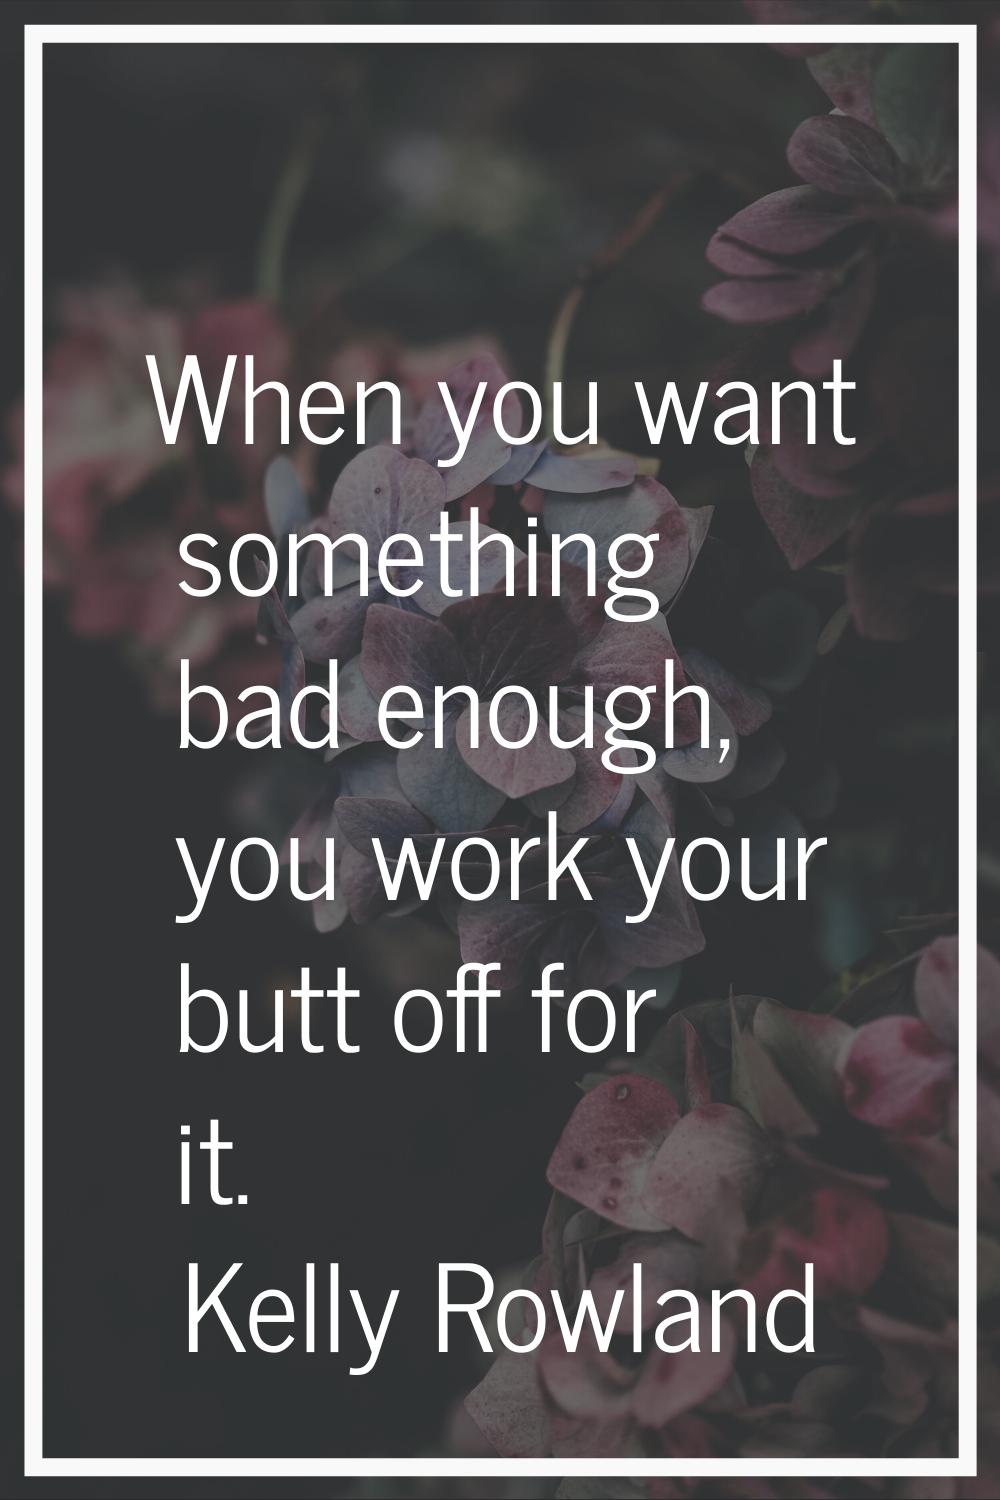 When you want something bad enough, you work your butt off for it.